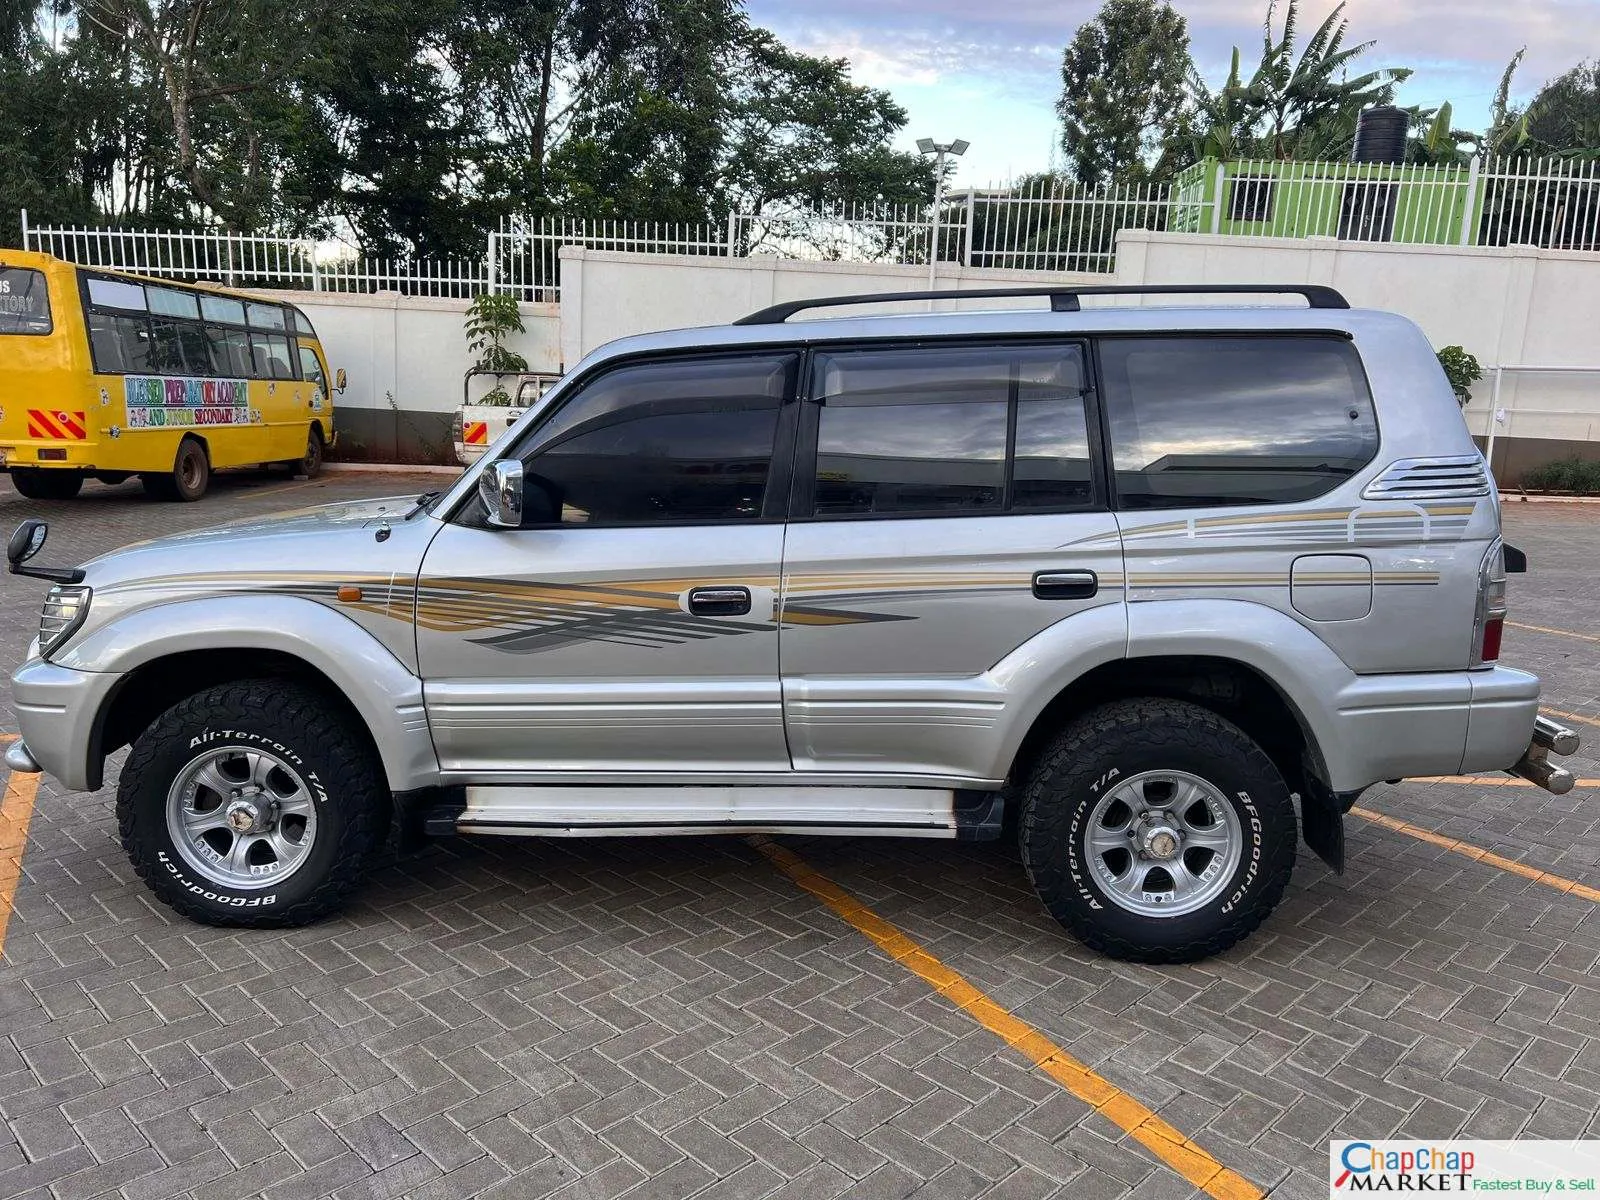 Toyota Prado 95 Auto You Pay 30% Deposit Trade in OK hire purchase installments exclusive